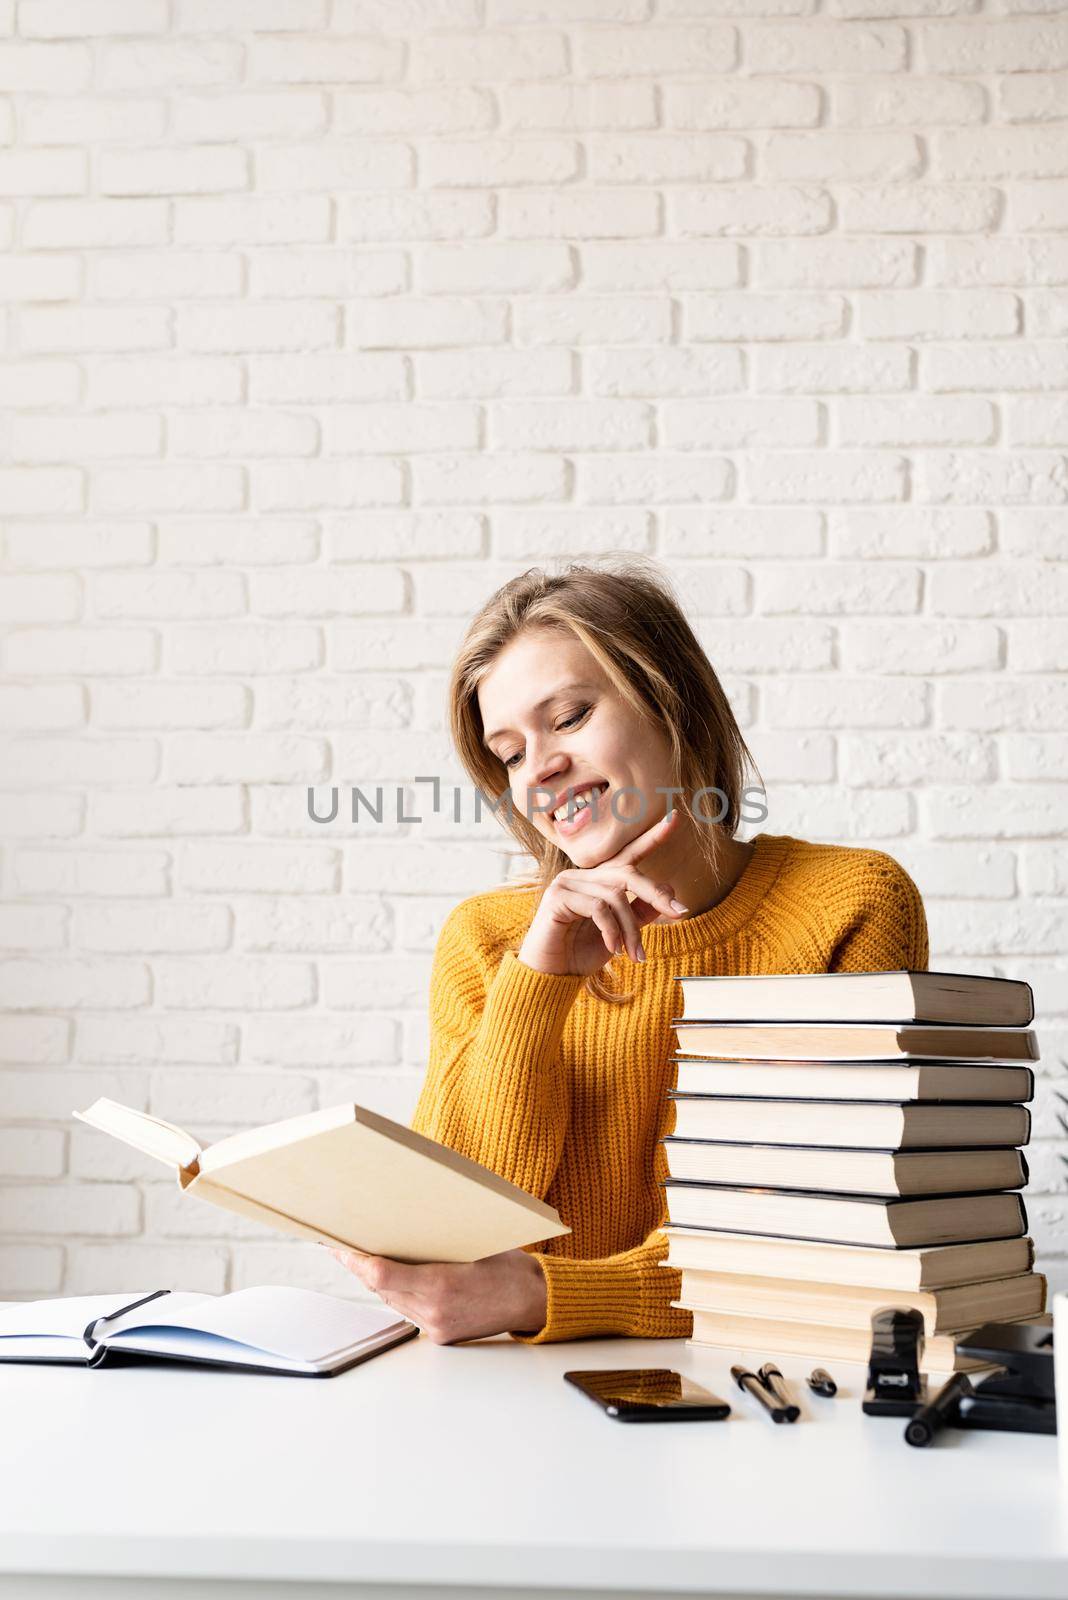 Young smiling woman in yellow sweater laughing reading a book